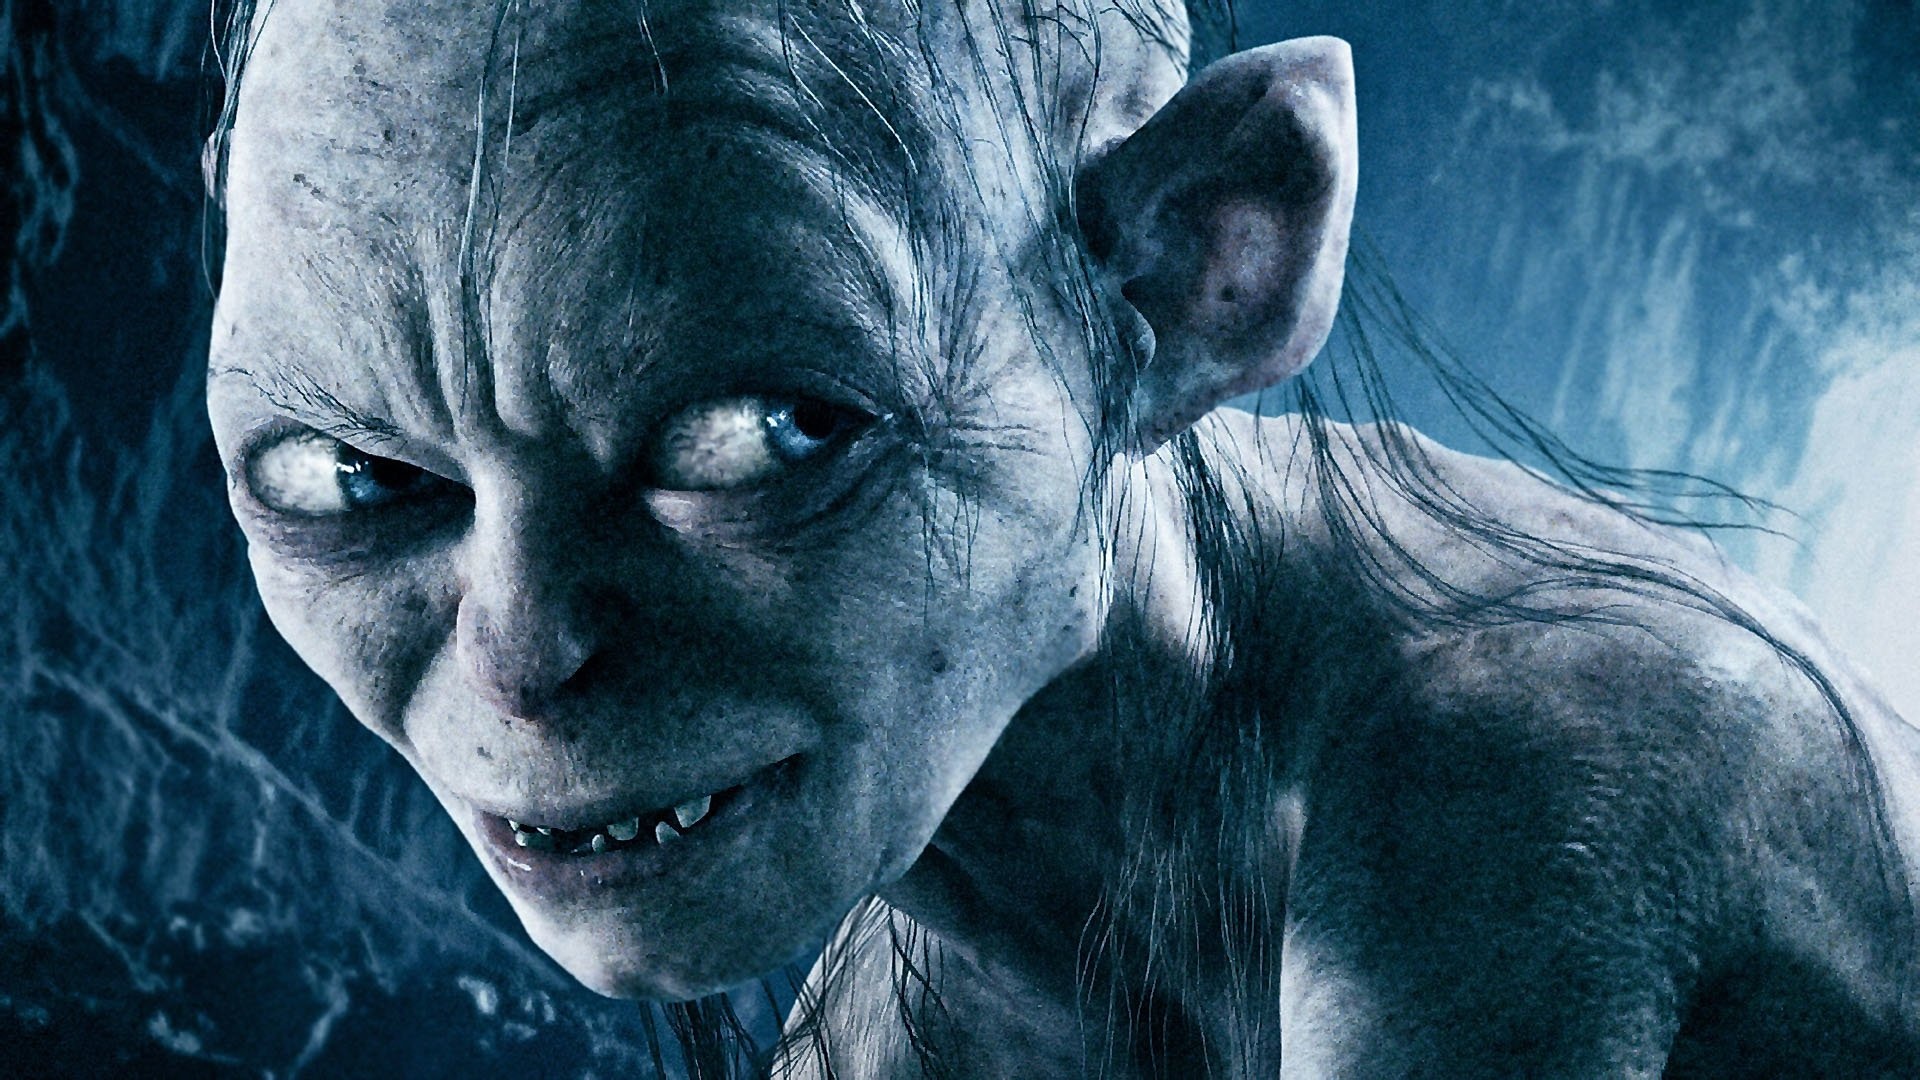 The Return of the King: Andy Serkis as Smeagol, Gollum, Fantasy. 1920x1080 Full HD Background.